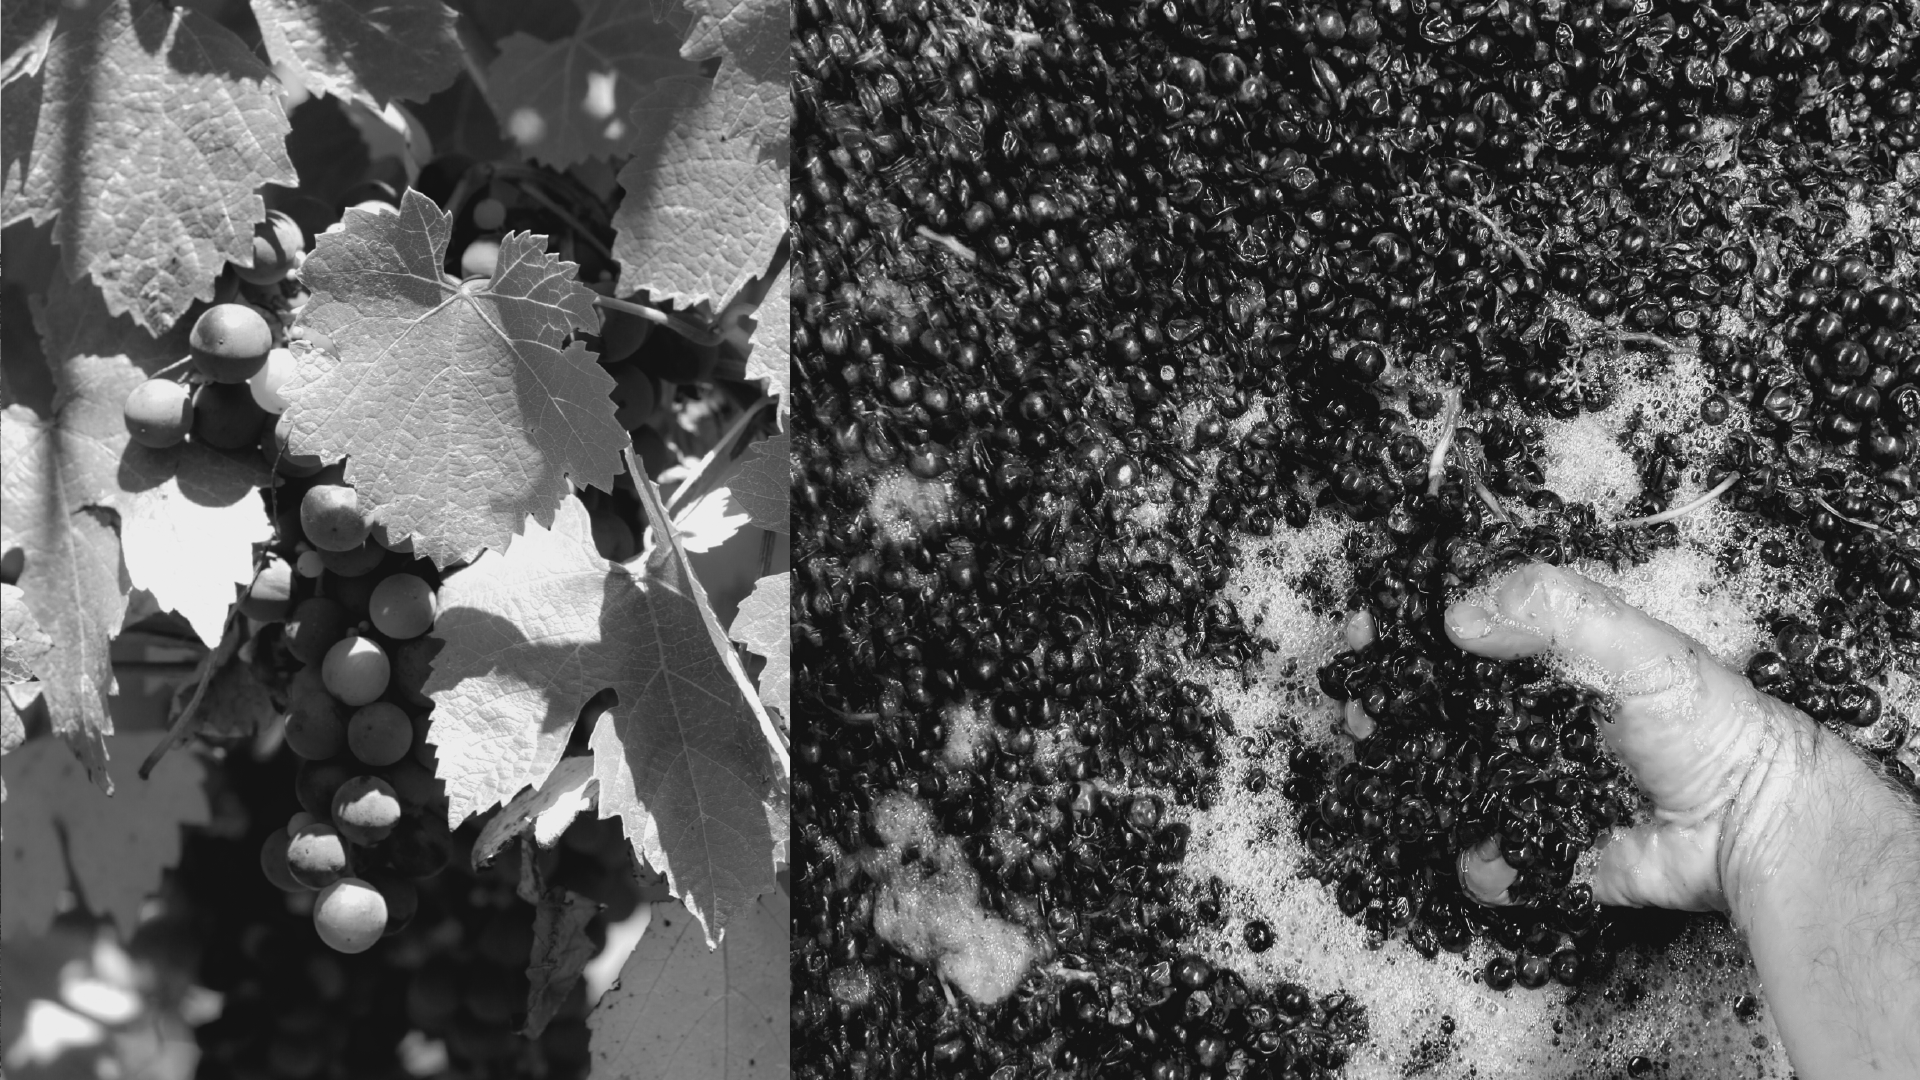 Black and White image banner. Two images are featured. Left: Grape vine with leaves and a bunch of grapes hanging. Right: A hand holding a handful of grapes during the wine making process.